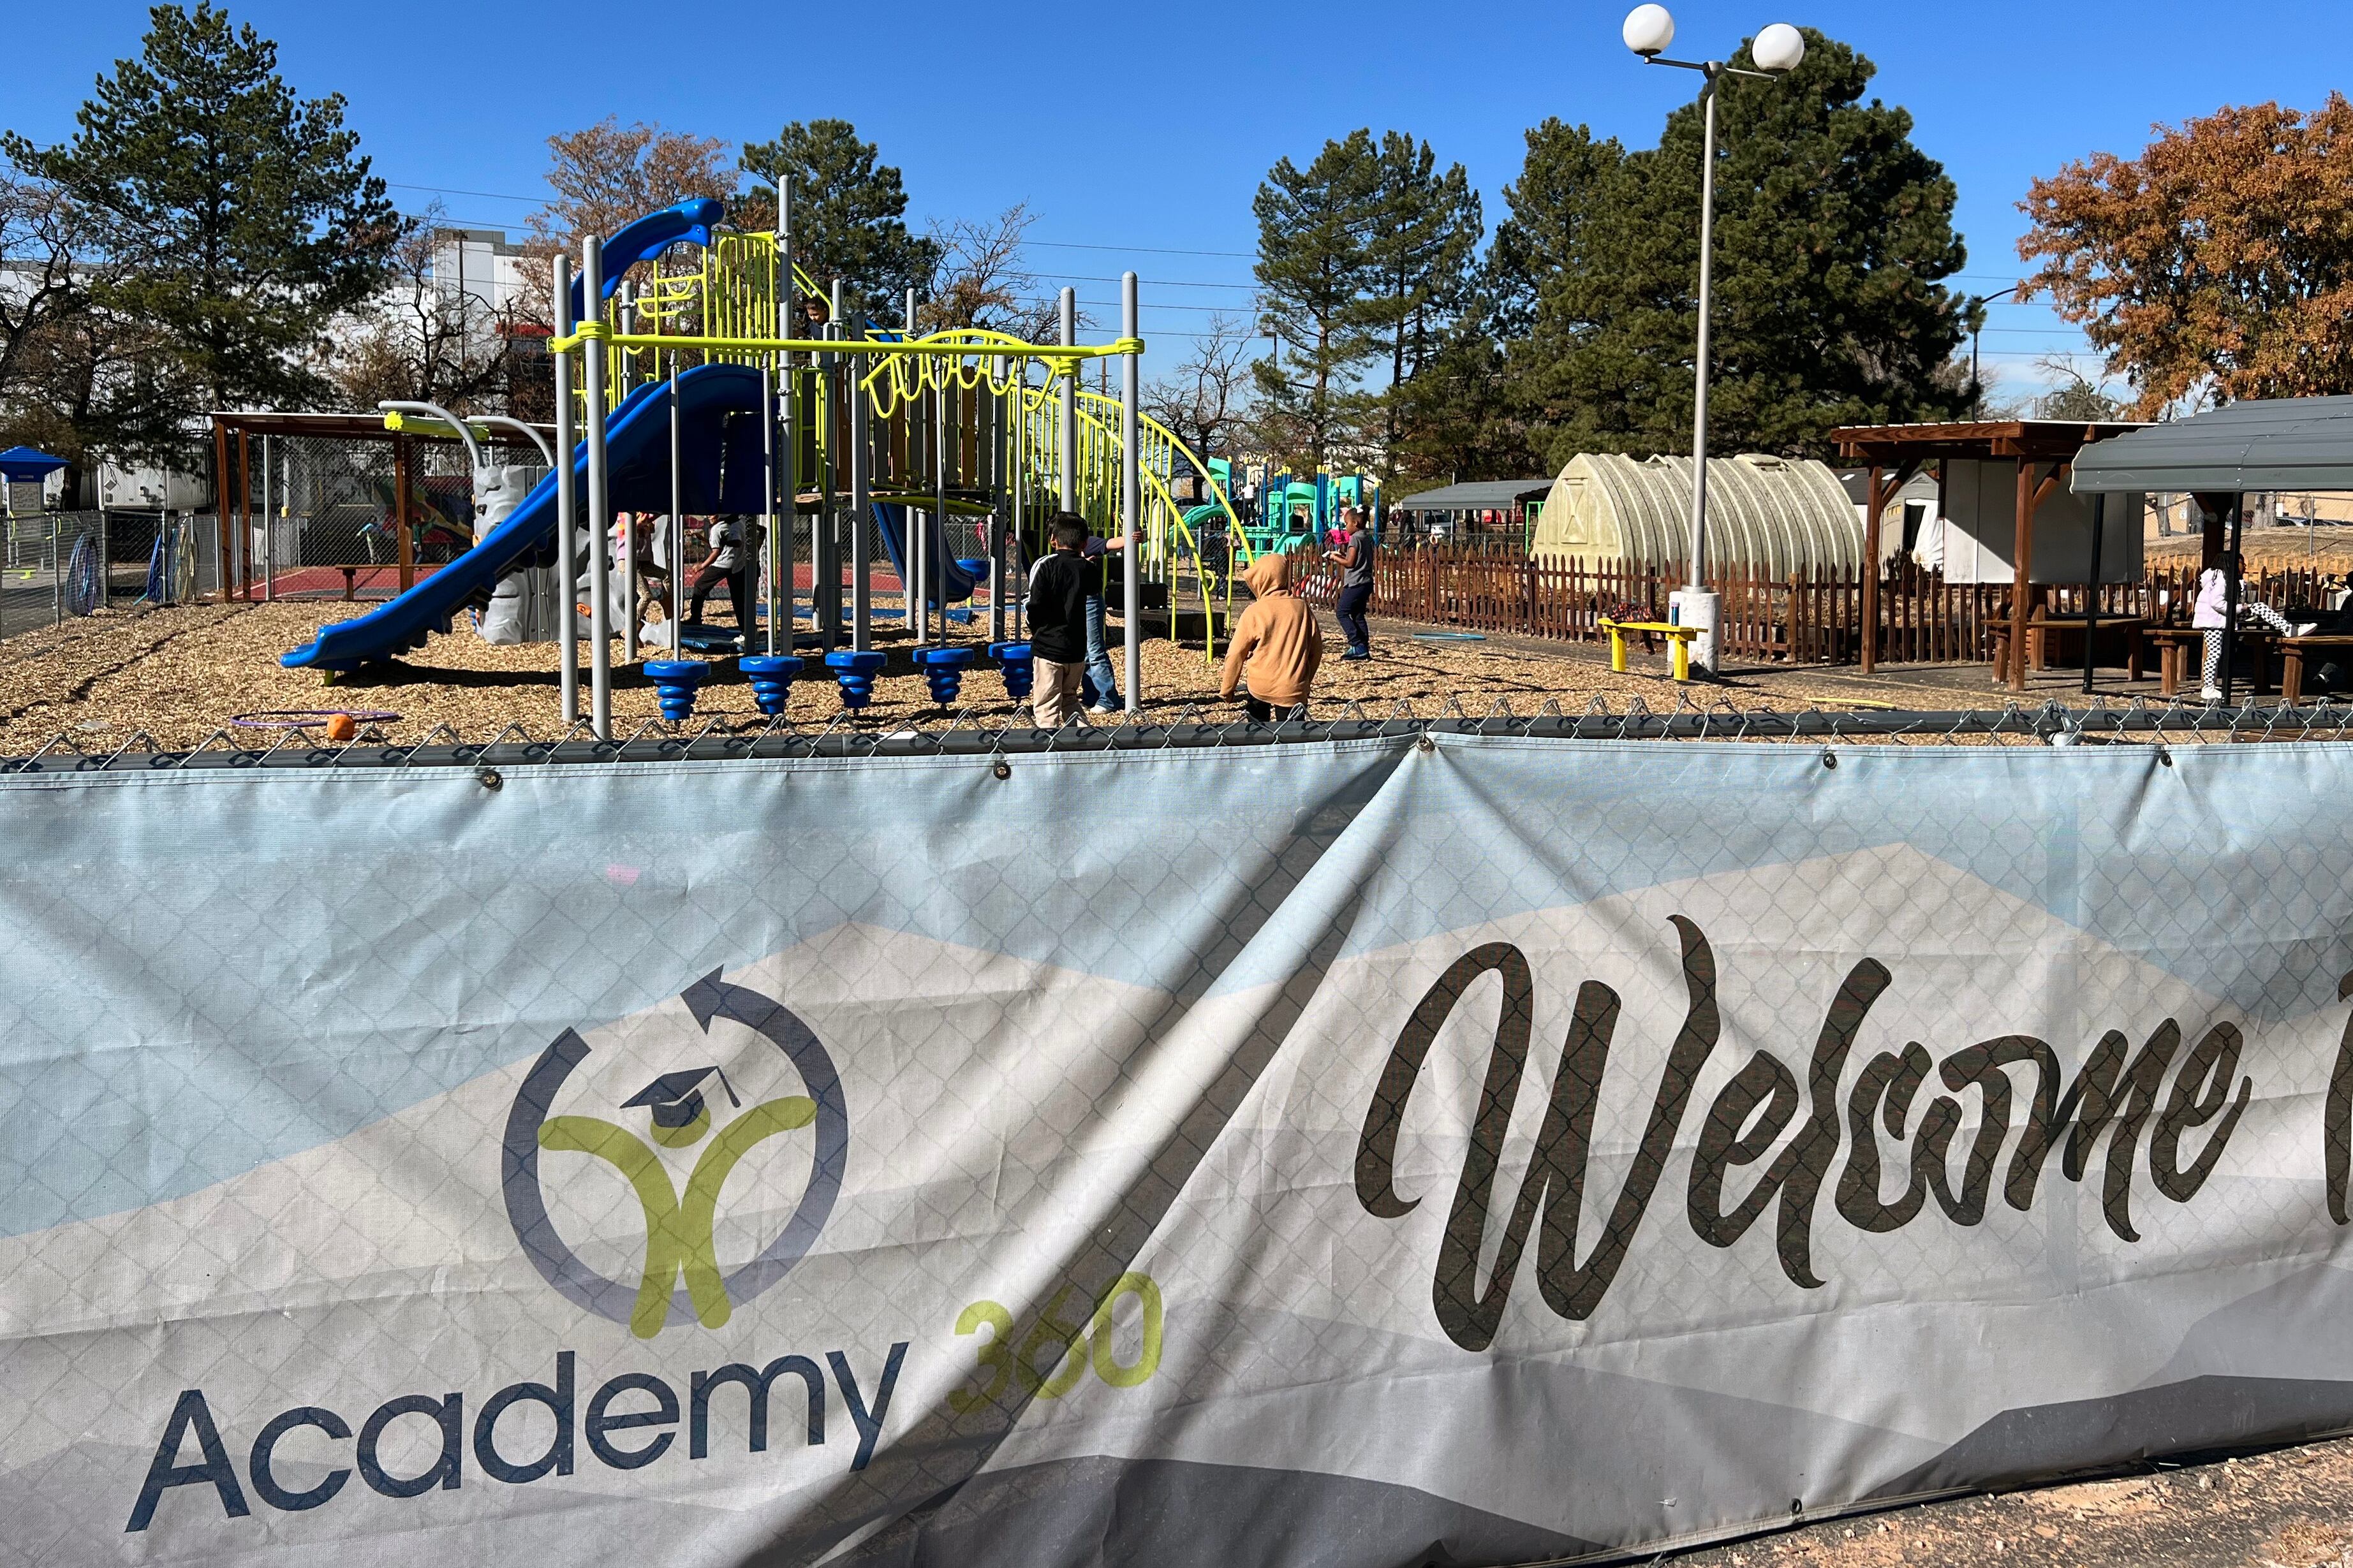 A banner with the words "Academy 360" and "Welcome" in the foreground with young students playing at a playground in the background.